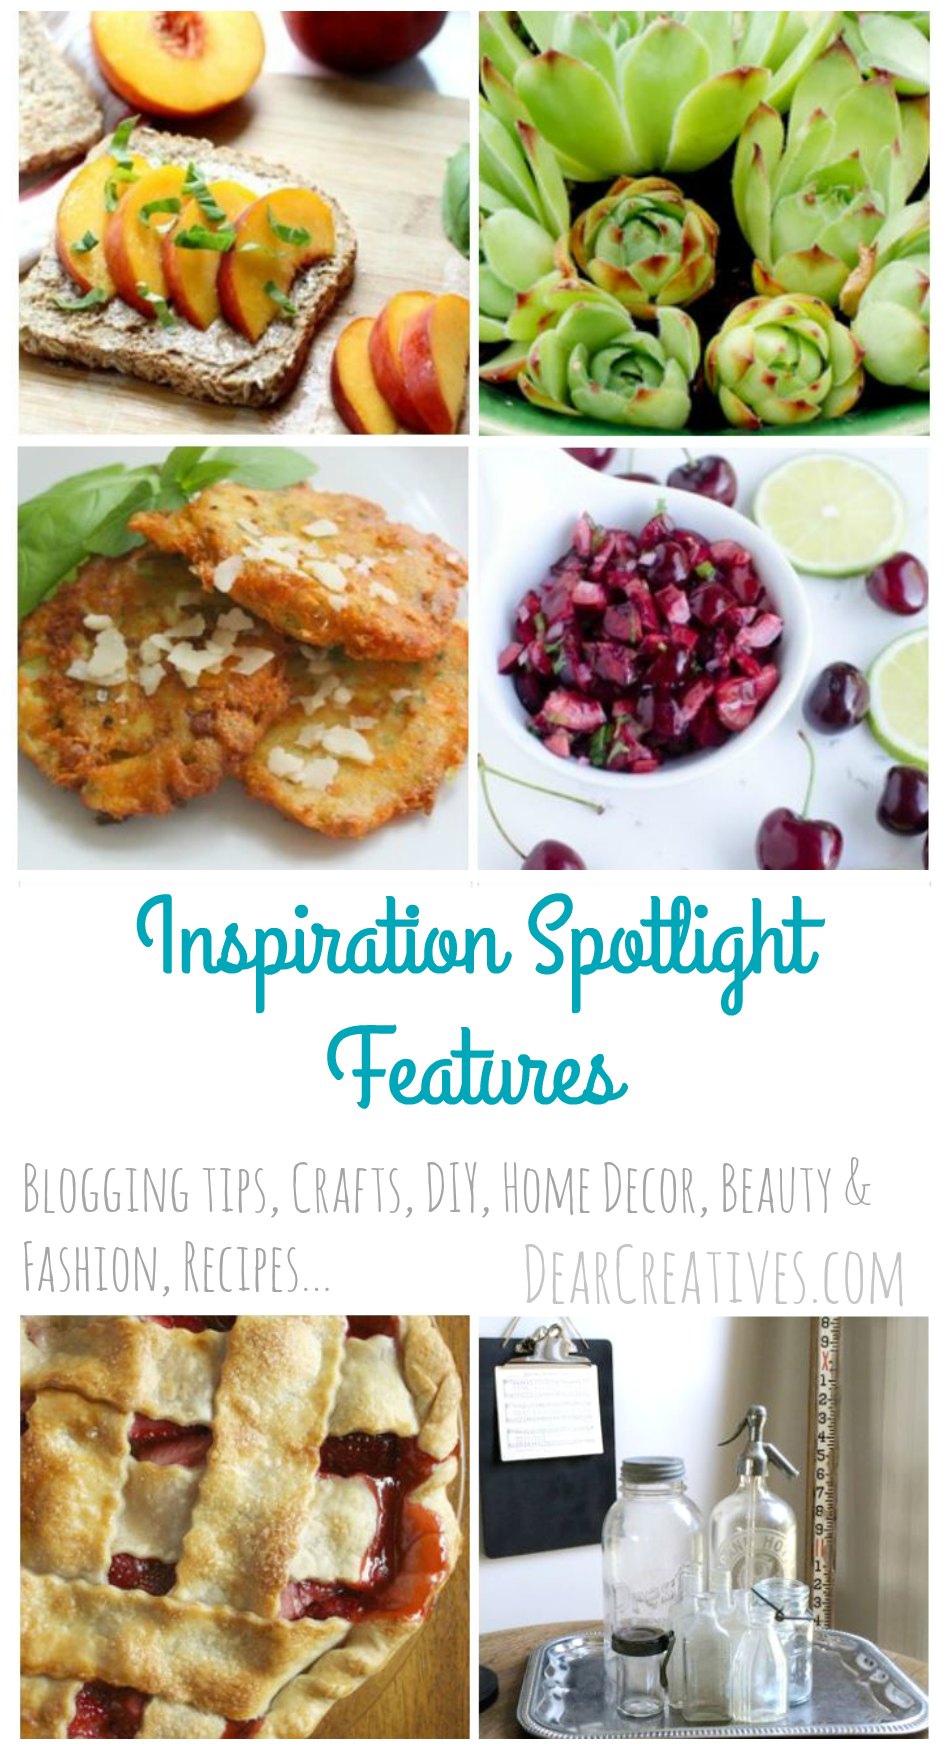 Inspiration Spotlight Linkup Party where bloggers share their favorite blogging tips, crafts, DIY, recipes, beauty & fashion, sewing and more! Stop by grab ideas, tutorials &...